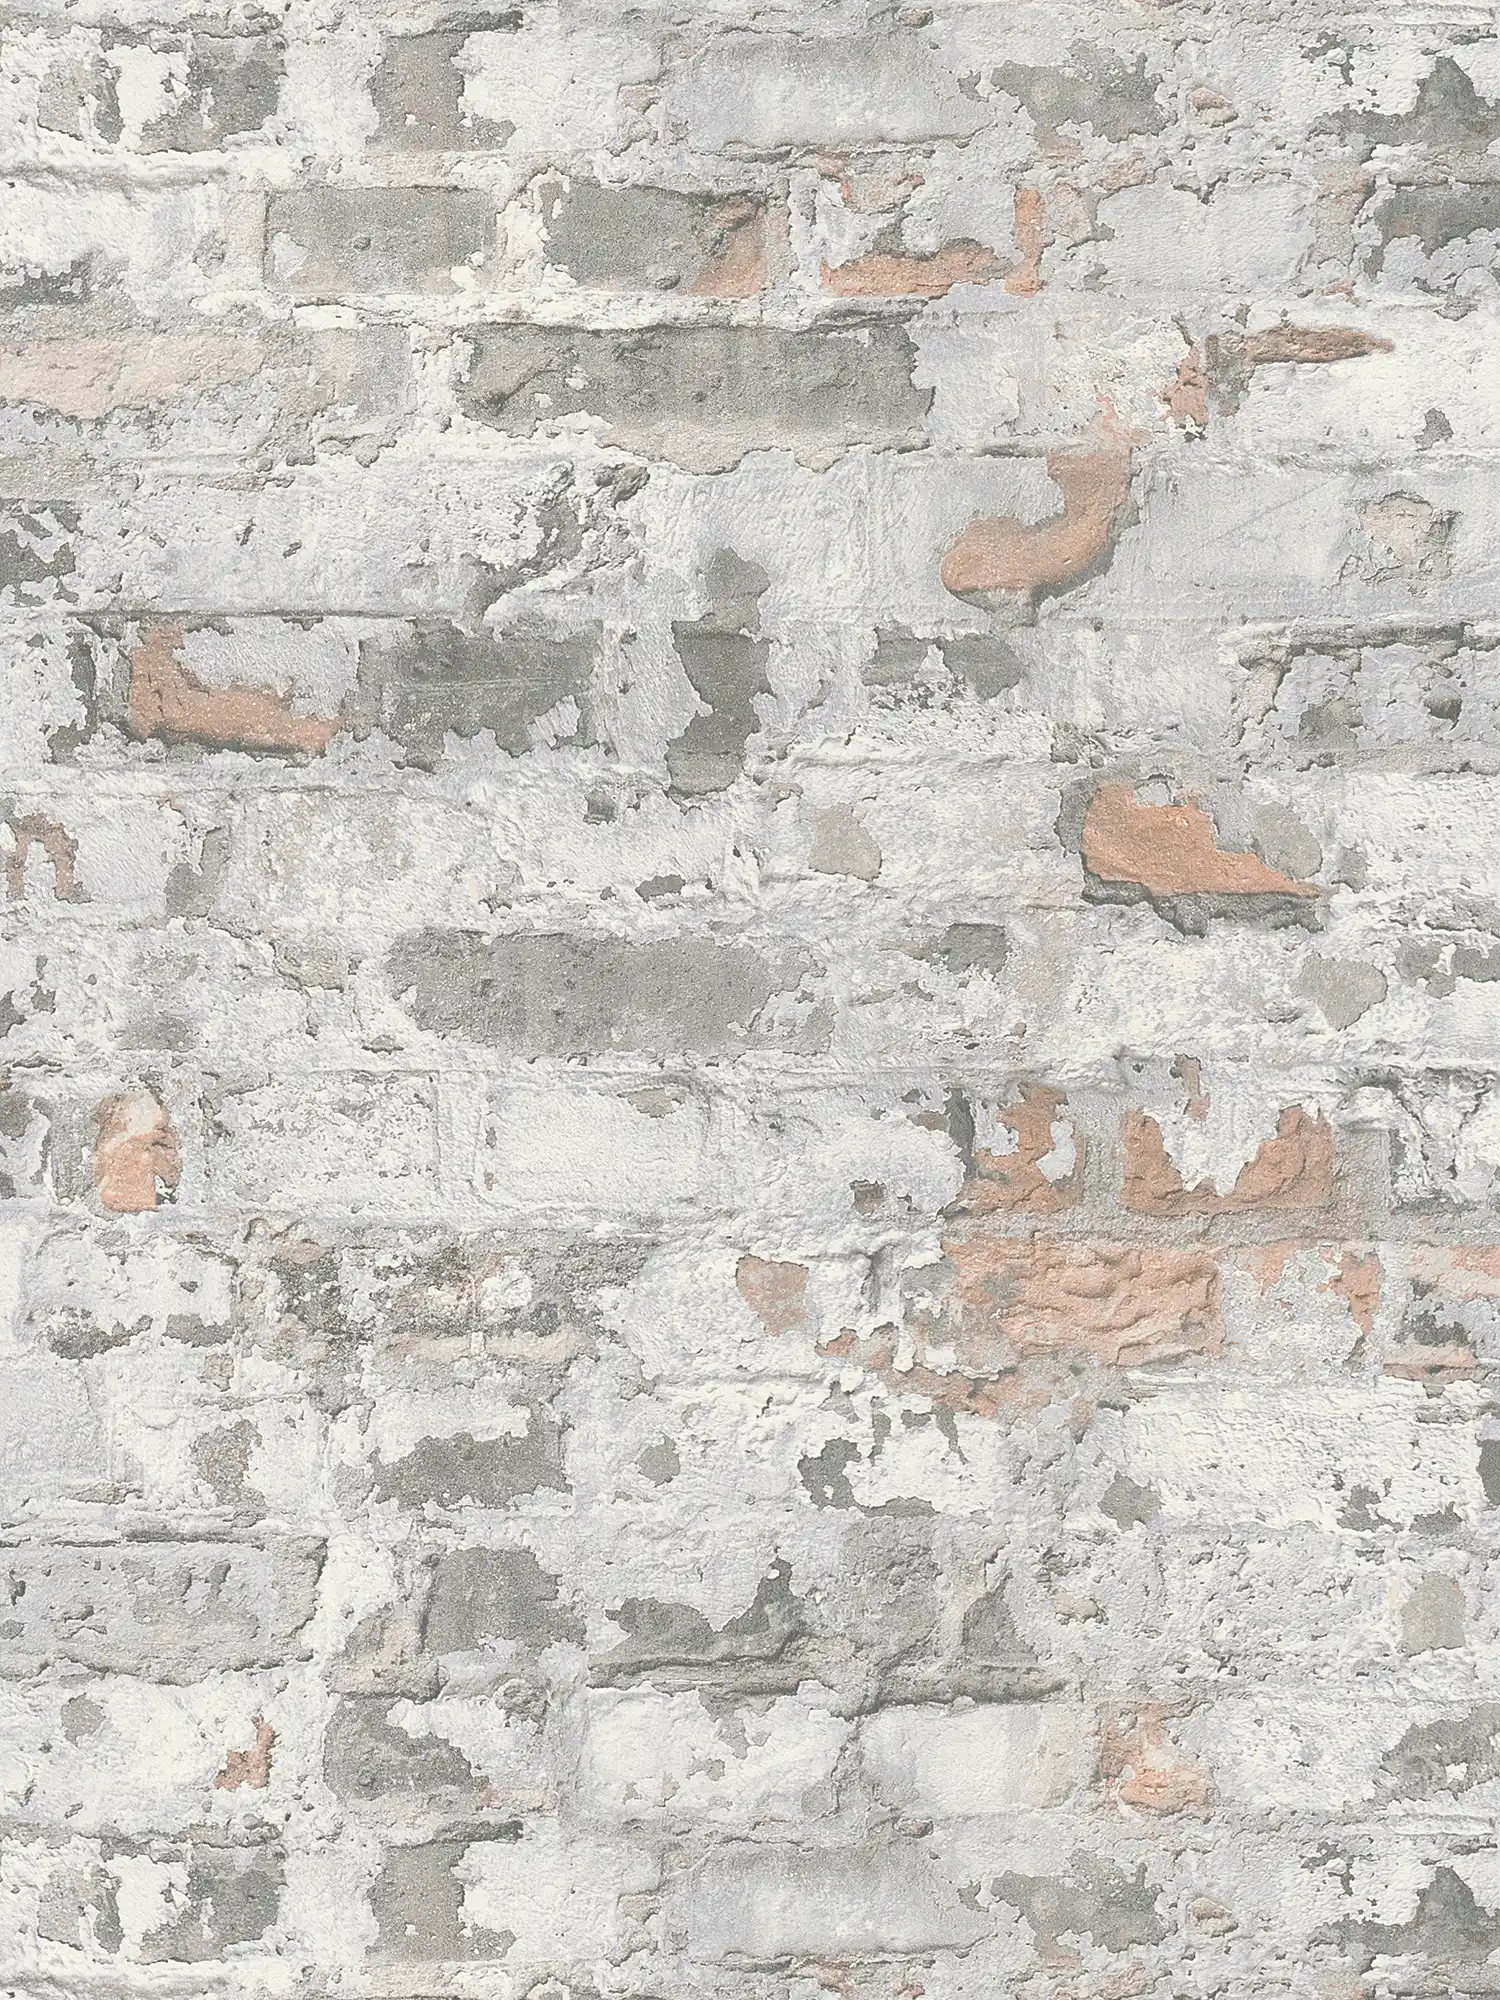         Rustic wall wallpaper with bricks in used design - grey, white
    